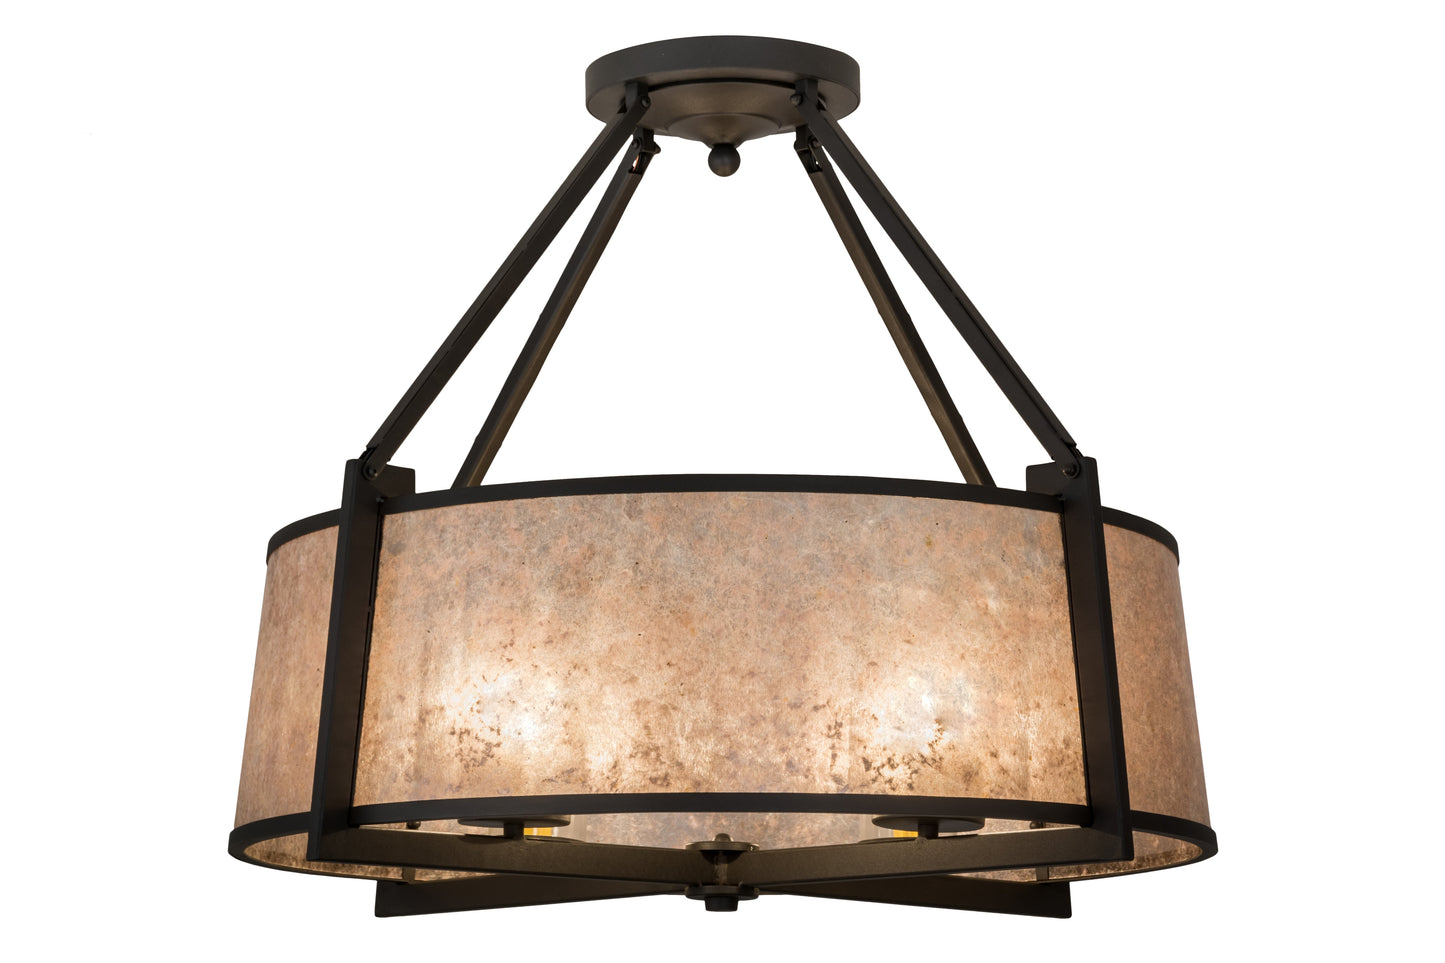 31" Cilindro Lucy 4-Light Semi Flushmount by 2nd Ave Lighting